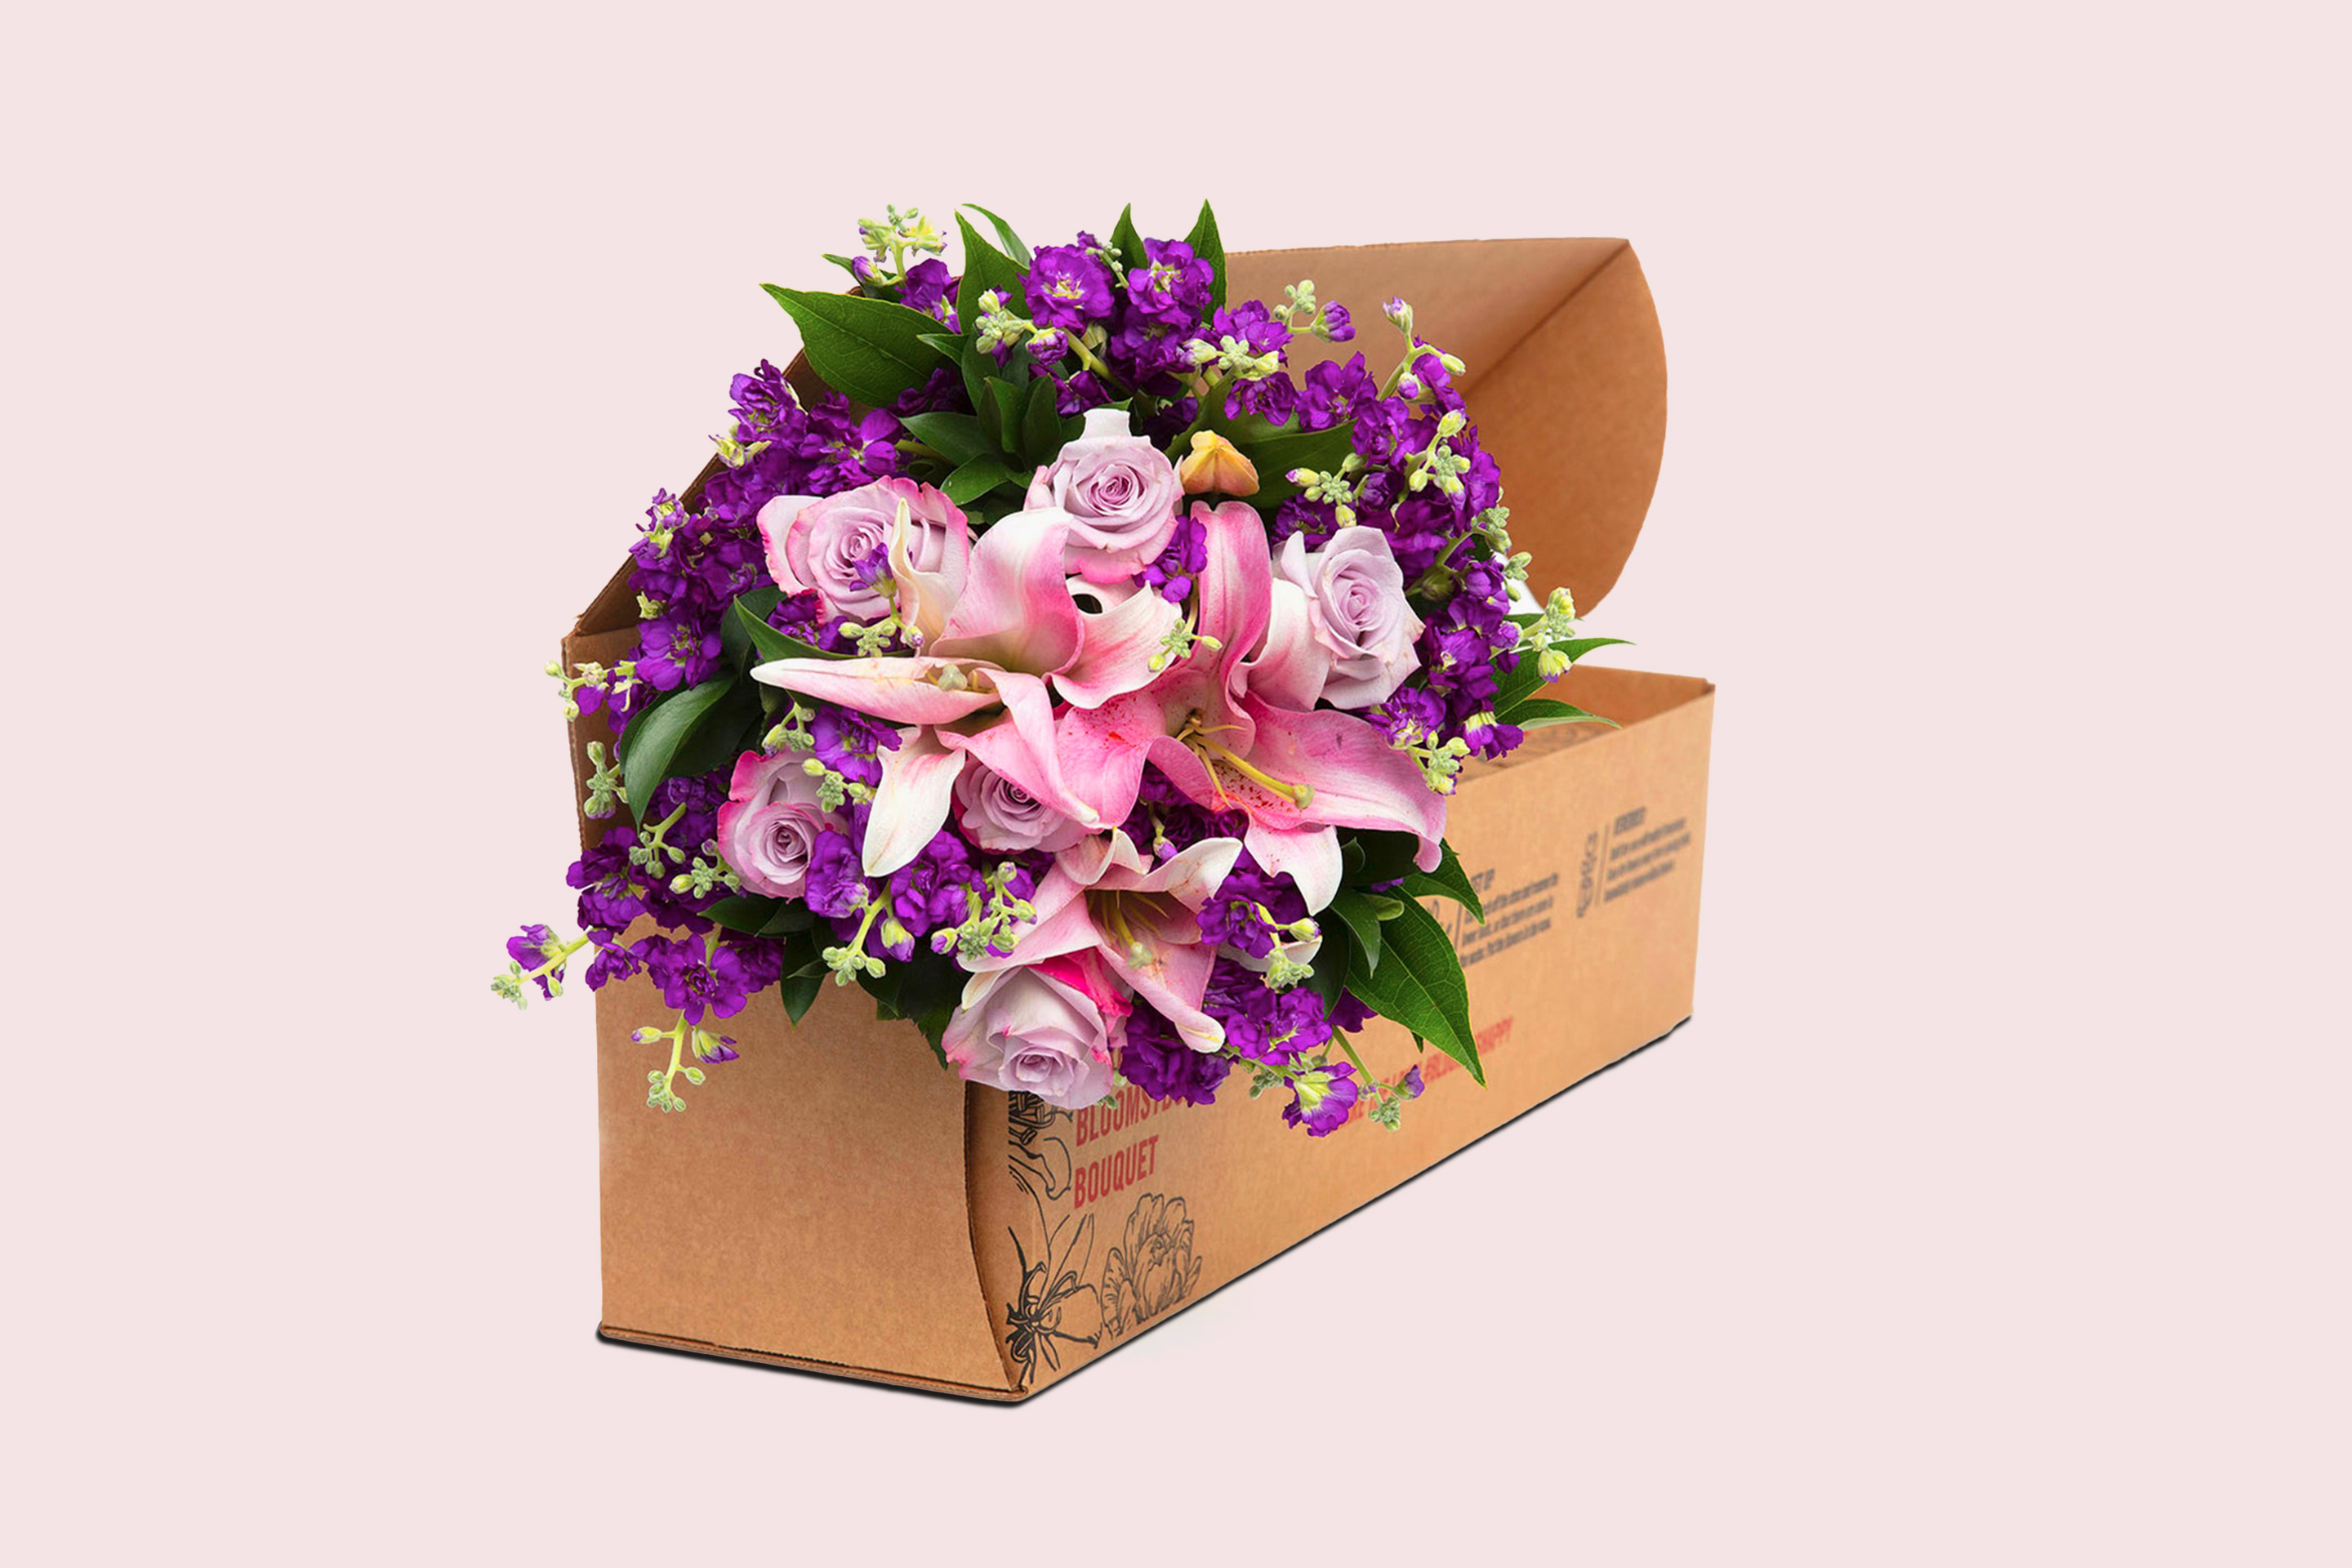 Bouquet of flowers by Bloomsy Box Flowers